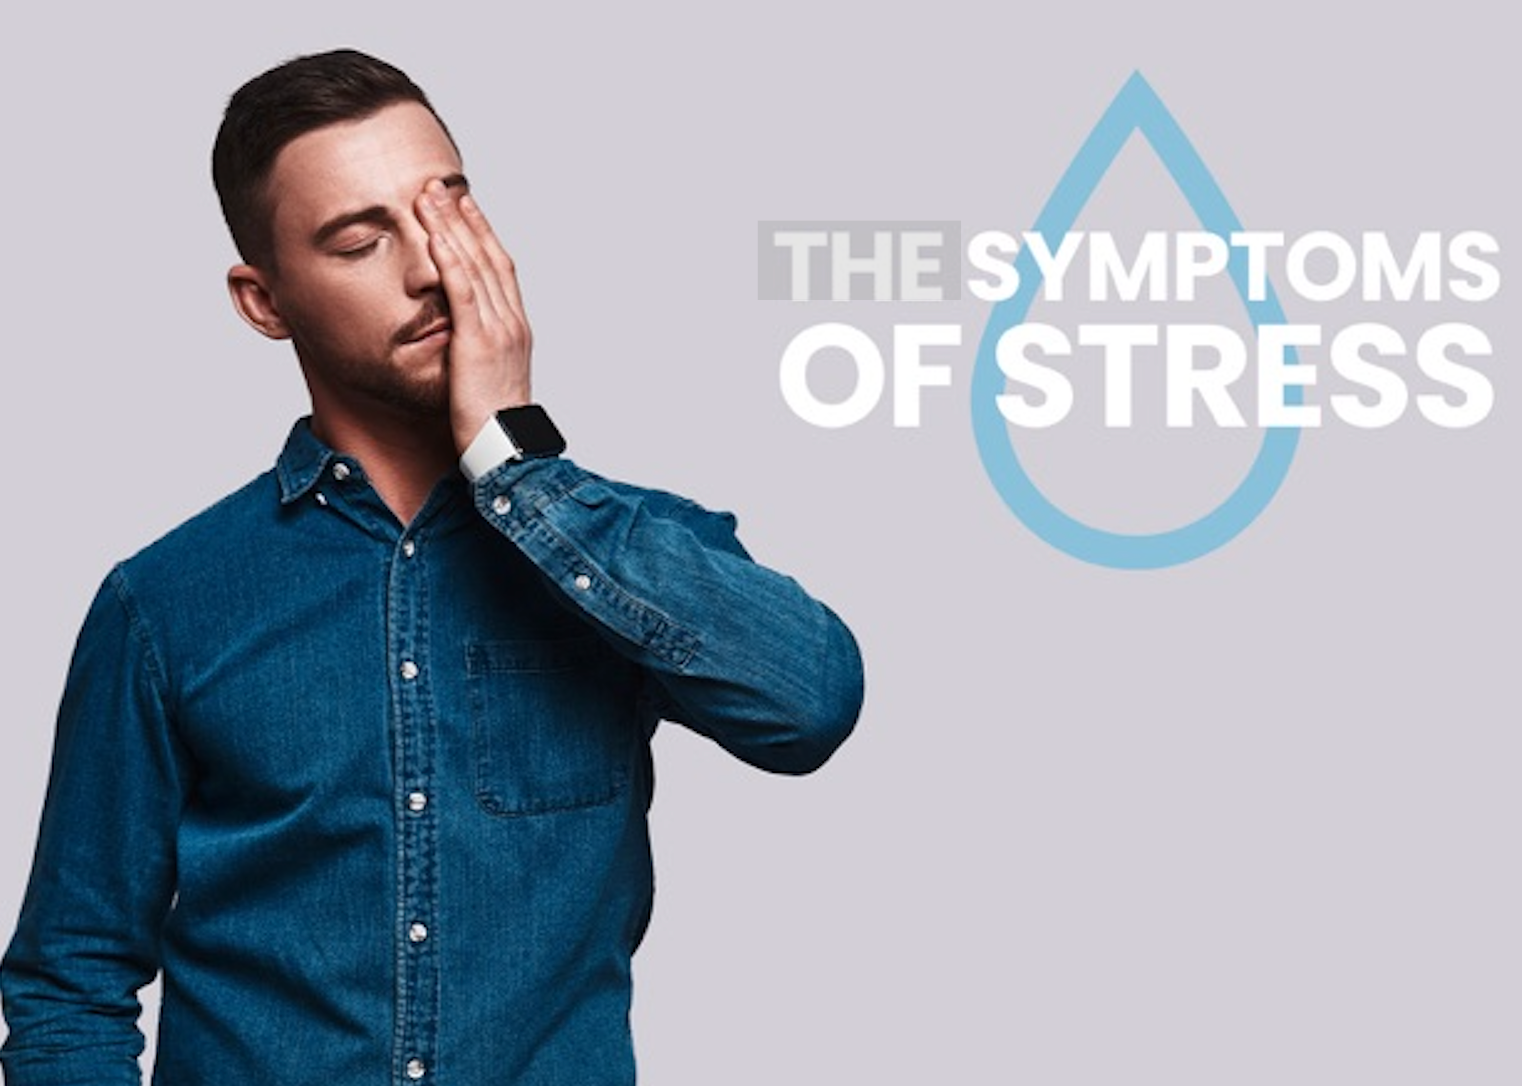 What Are The Long Term Symptoms Of Stress?